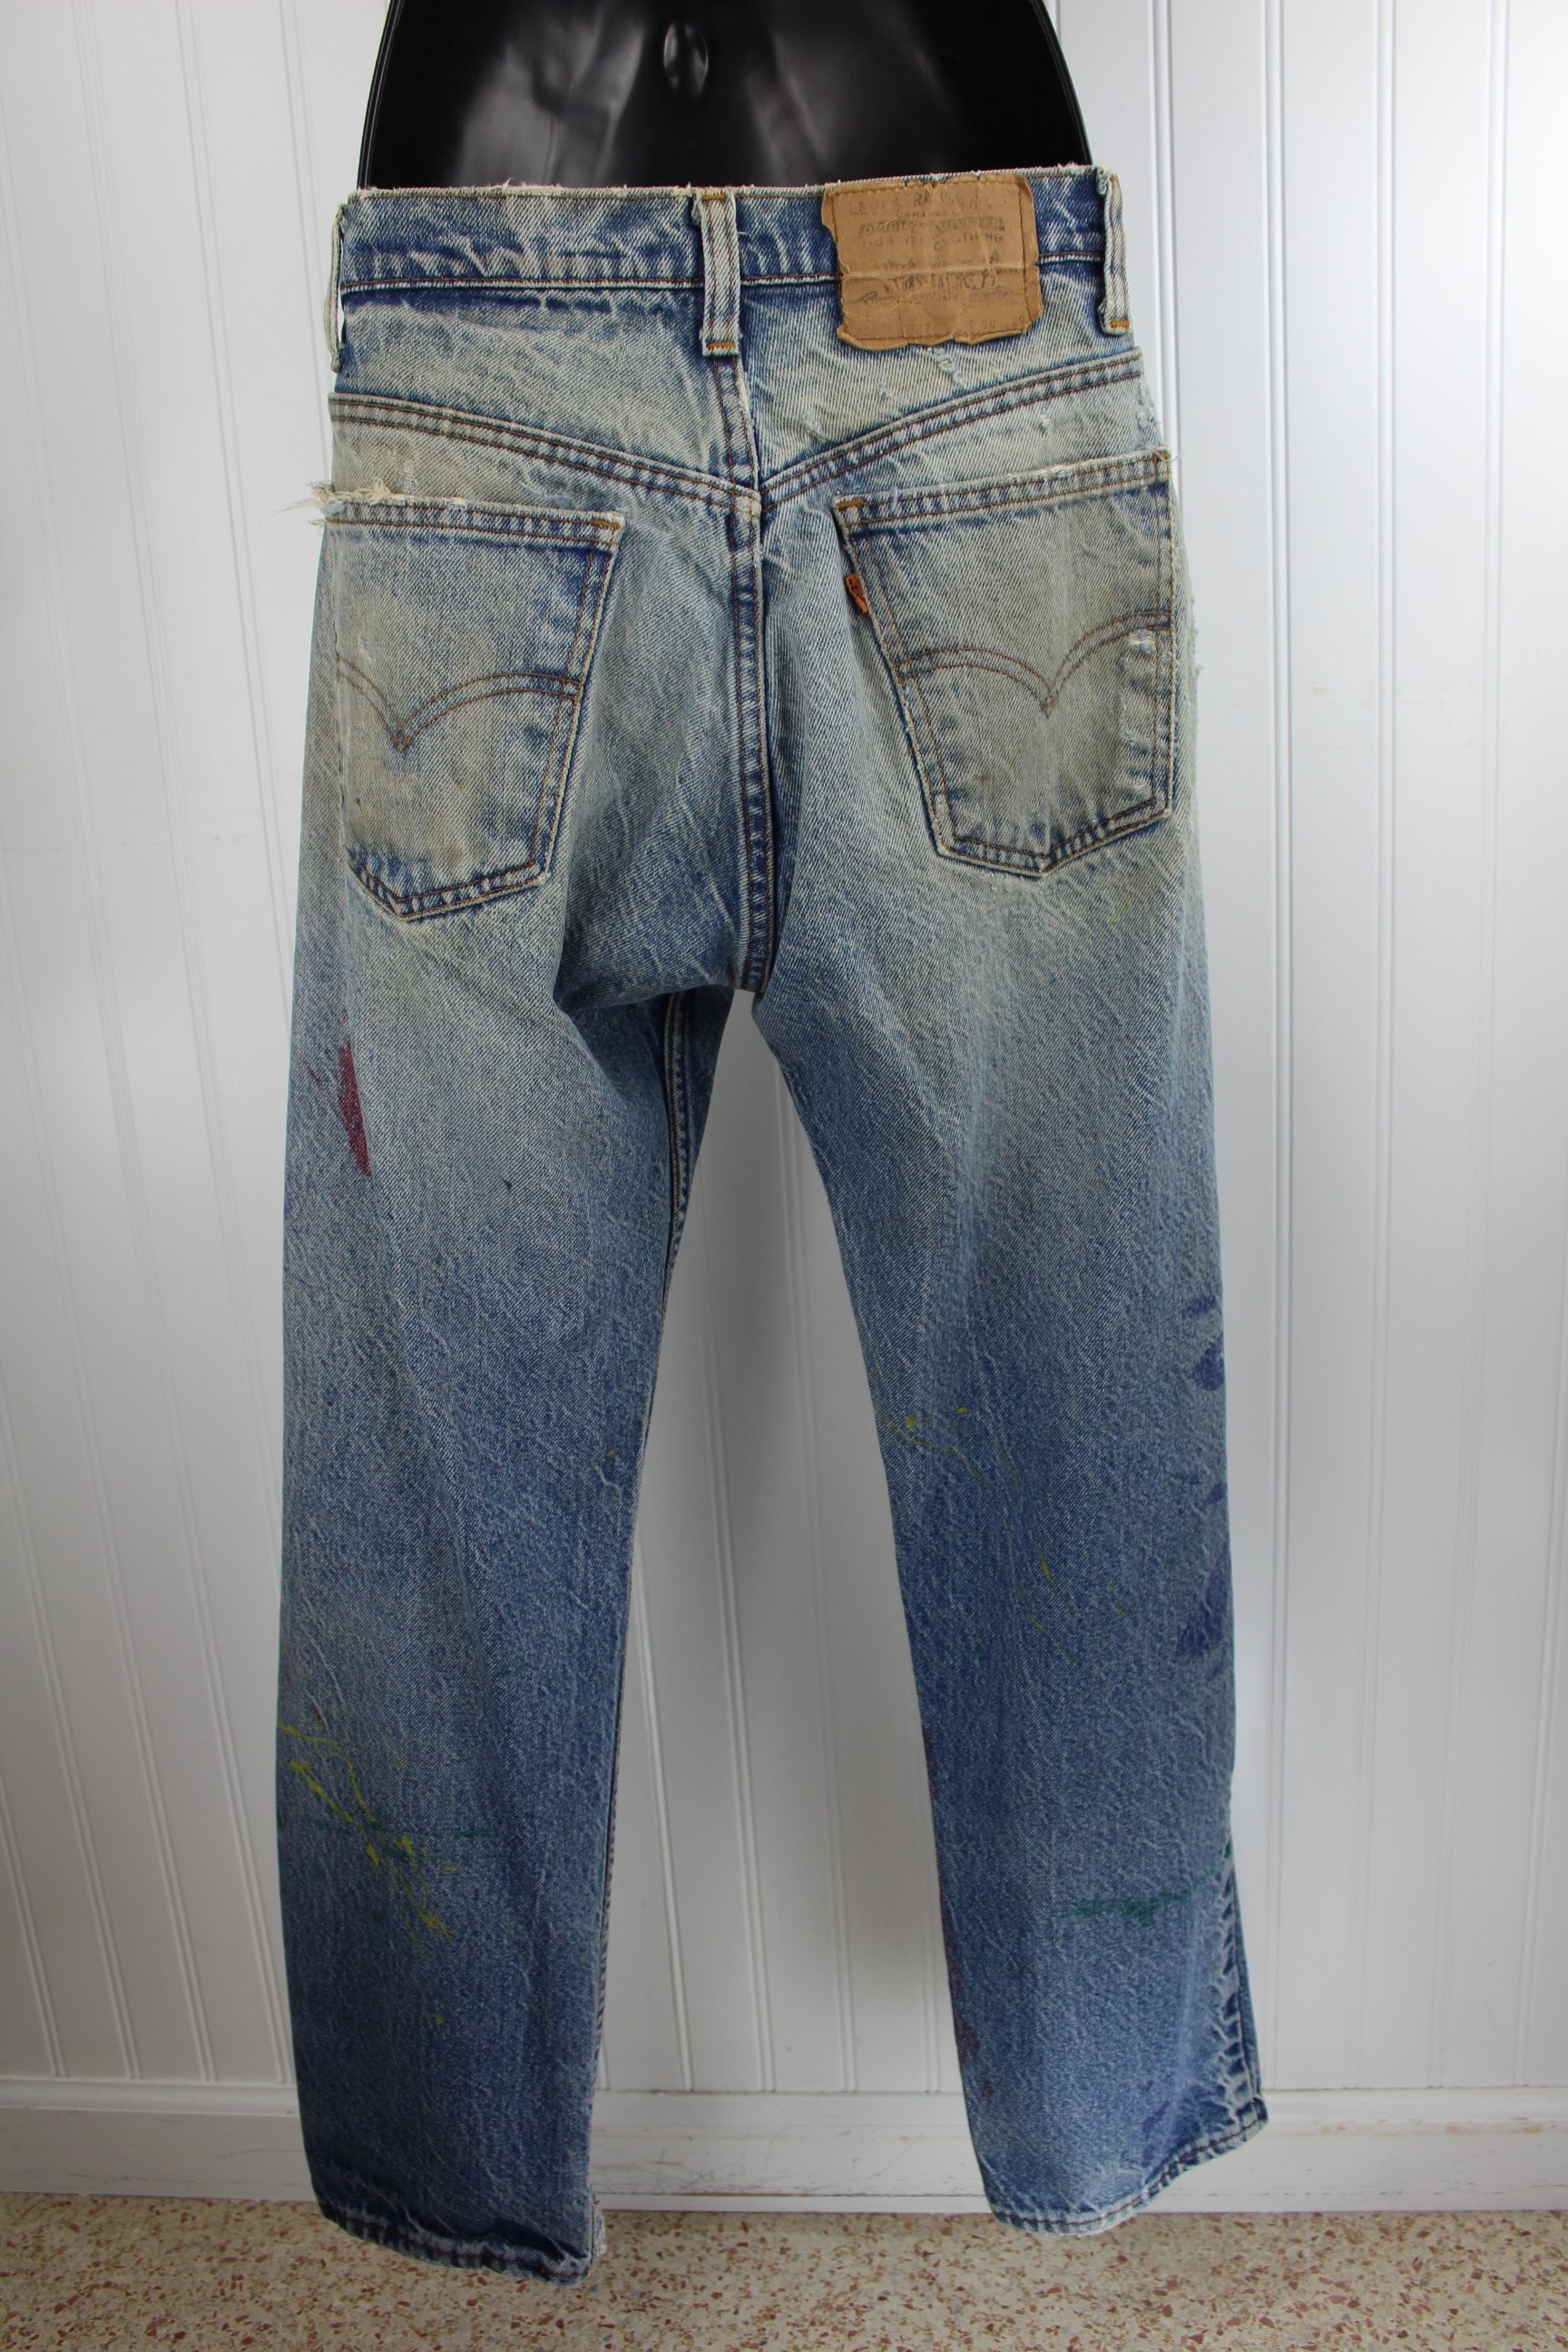 Vintage Levi's Skate Boarder Superbly Distressed Painted Jeans Early 1 –  Olde Kitchen & Home